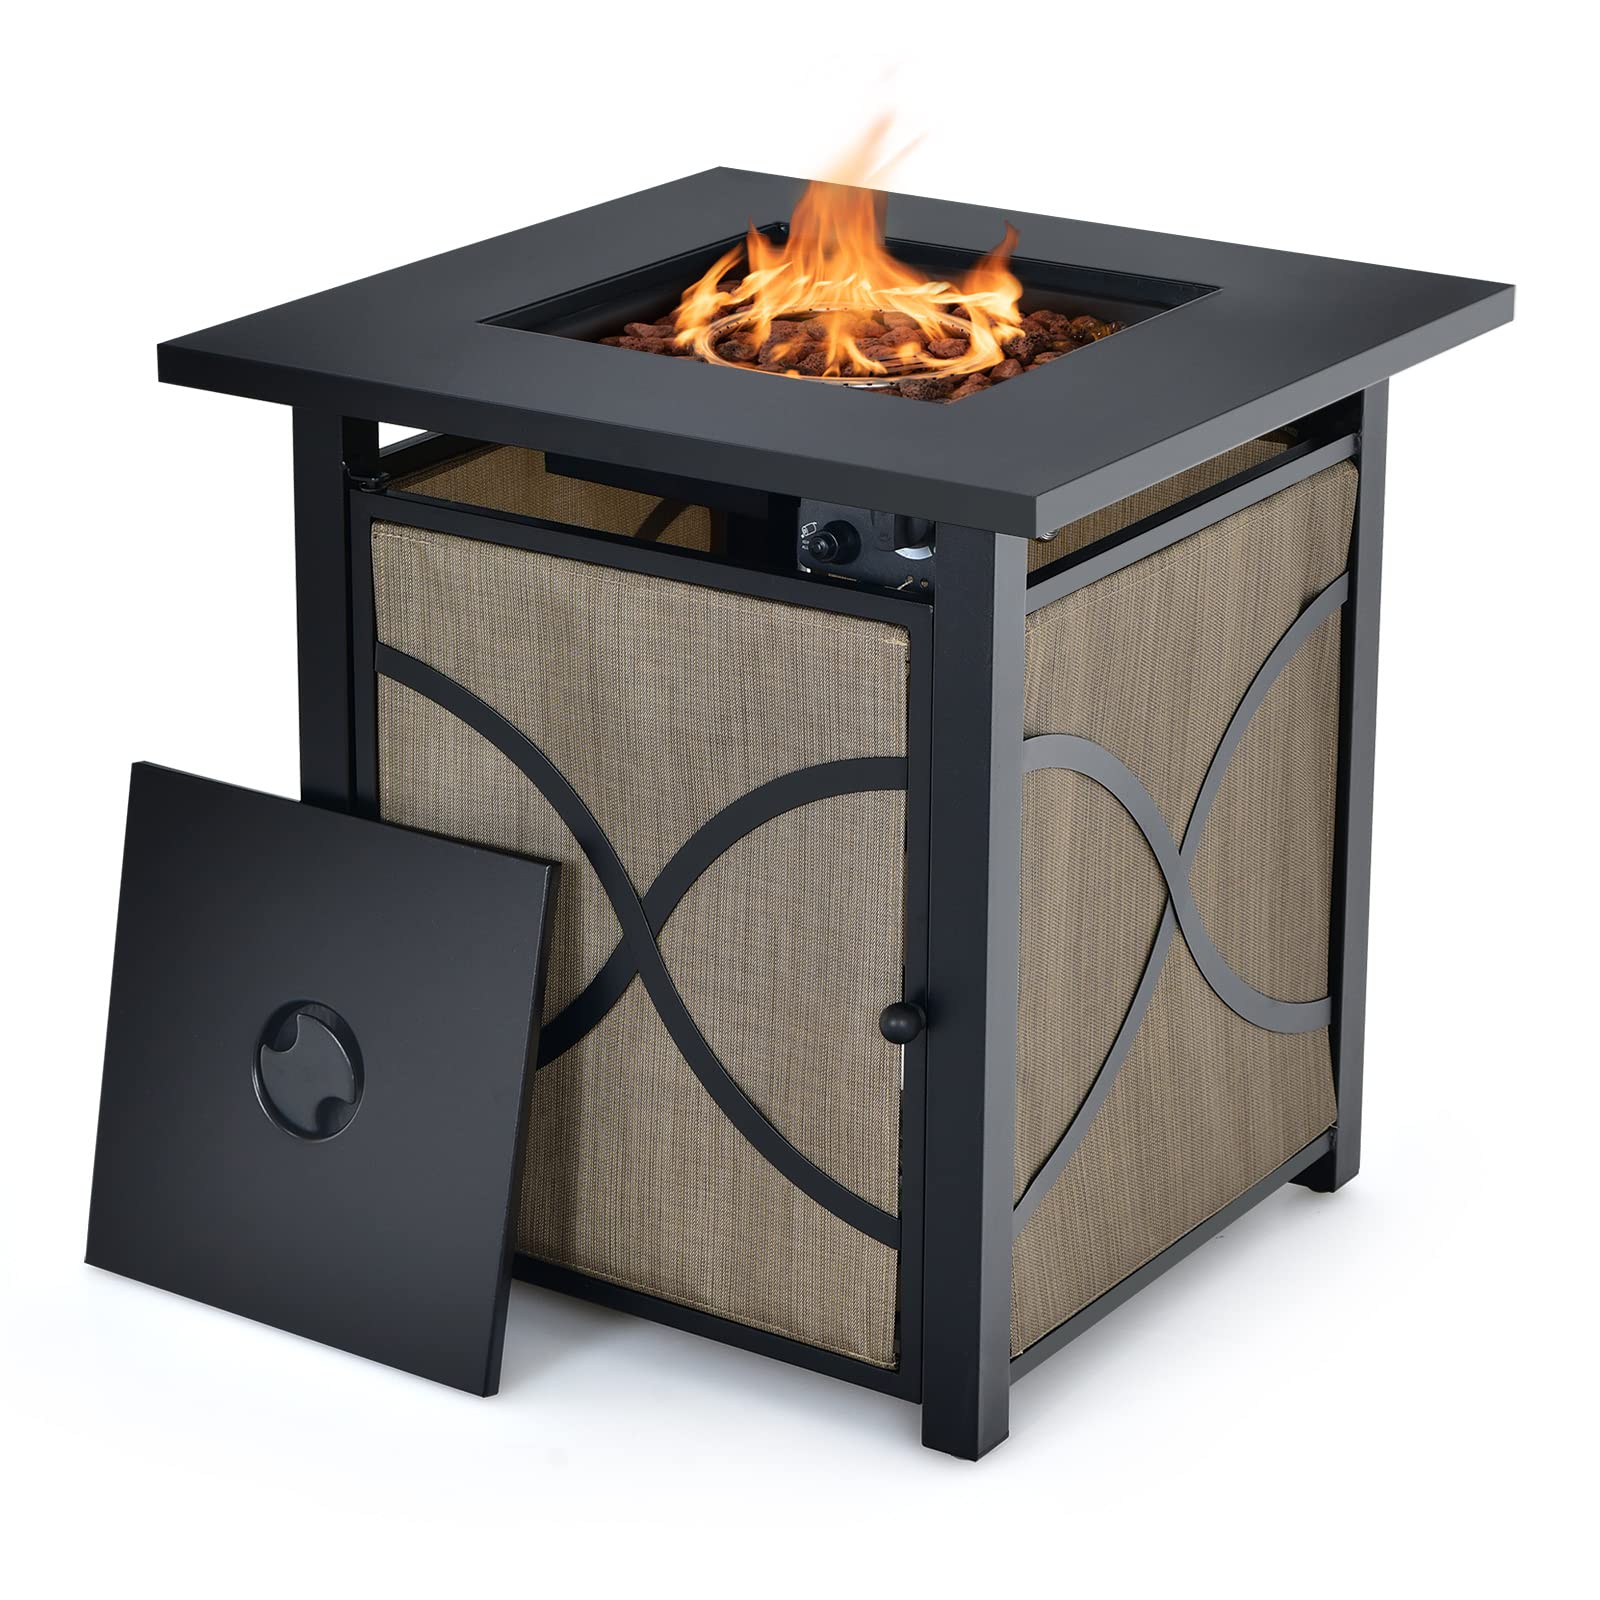 25-Inch Propane Fire Pit Table - Tangkula